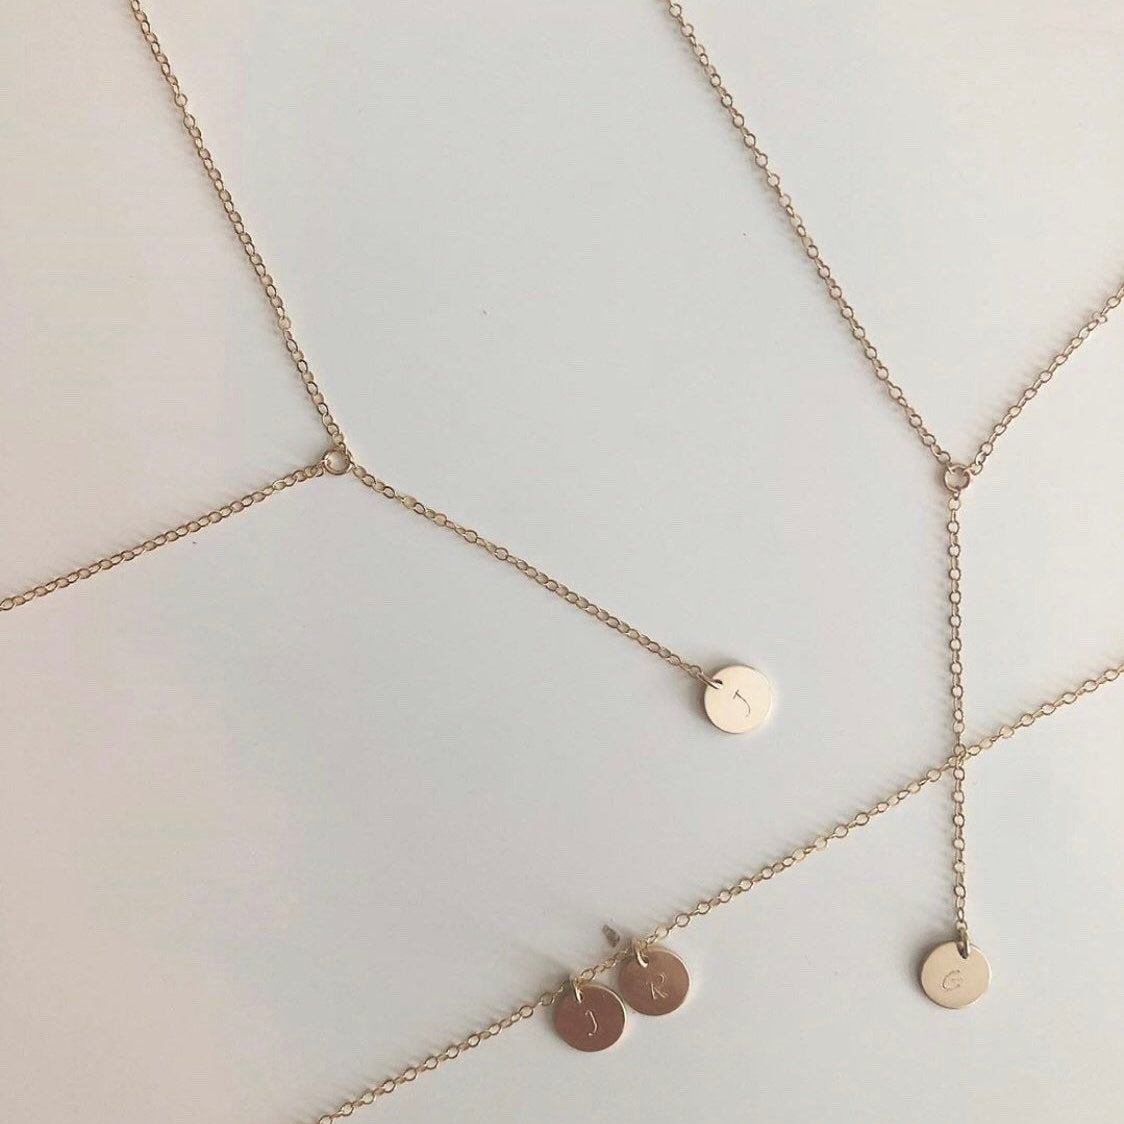 Custom Stamped Gold Fill Drop Necklace - hypoallergenic - tarnish free - made to last - high quality - Y necklace - personalized gift.